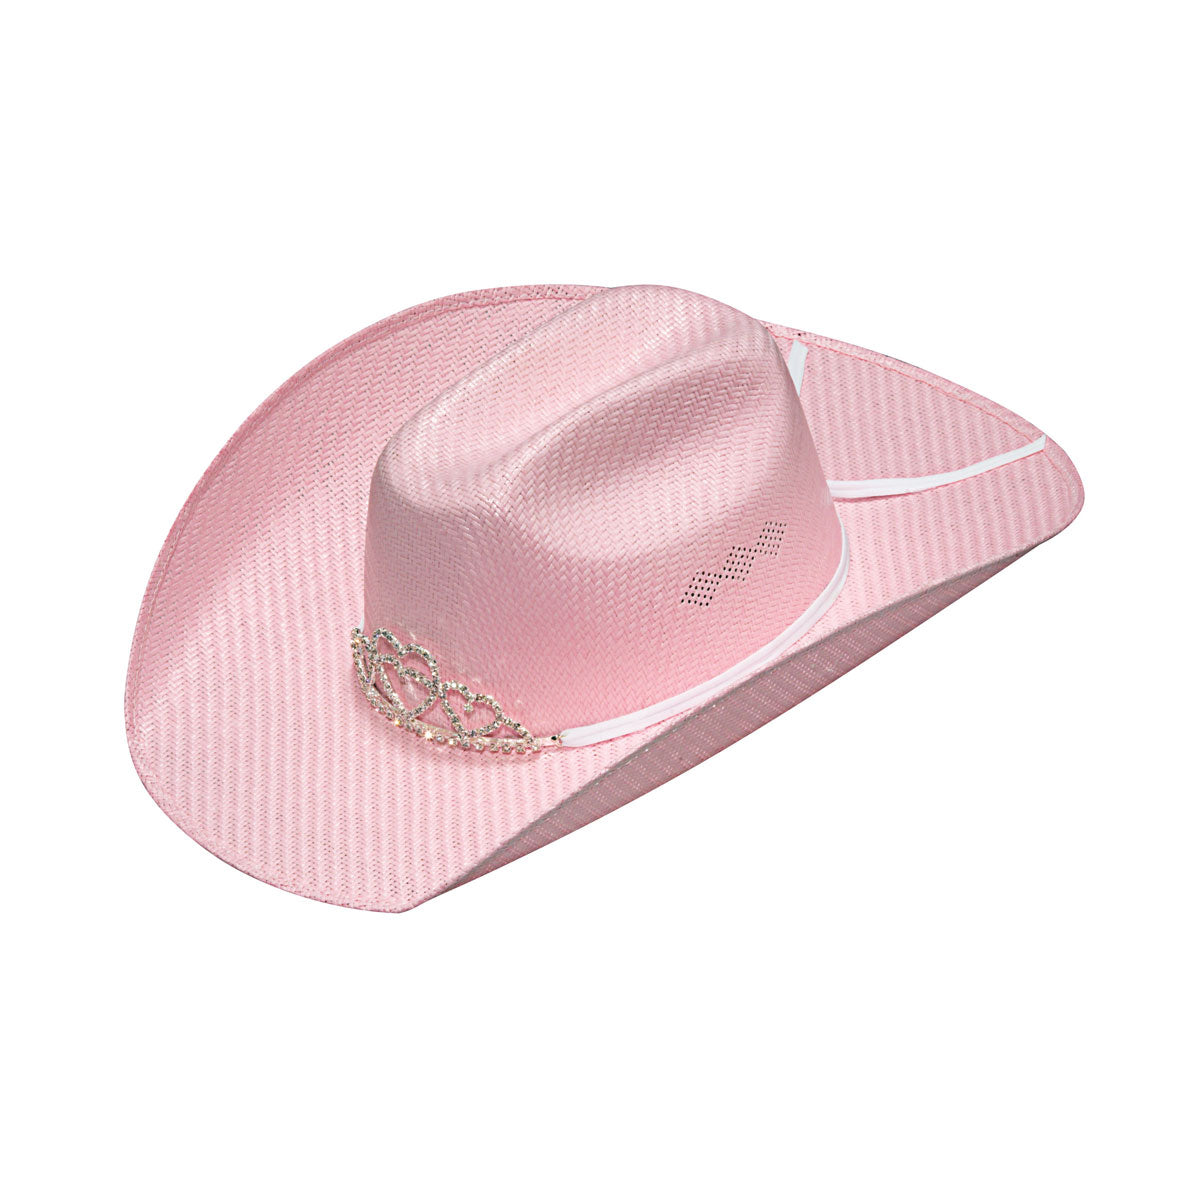 TWISTER YOUTH WESTERN HAT